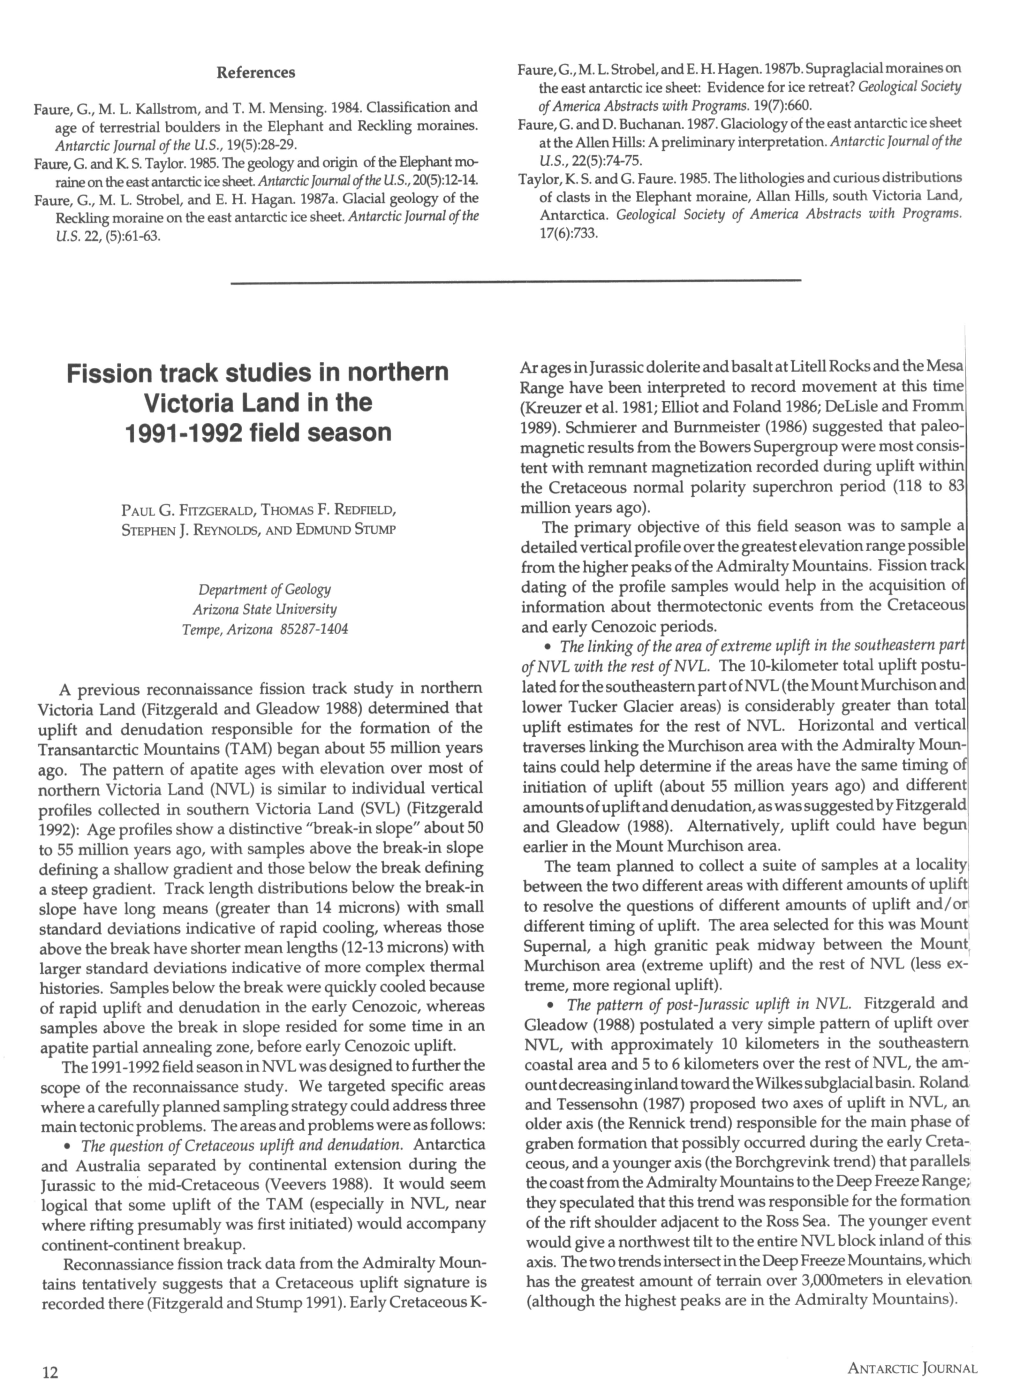 Fission Track Studies in Northern Victoria Land in the 1991-1992 Field